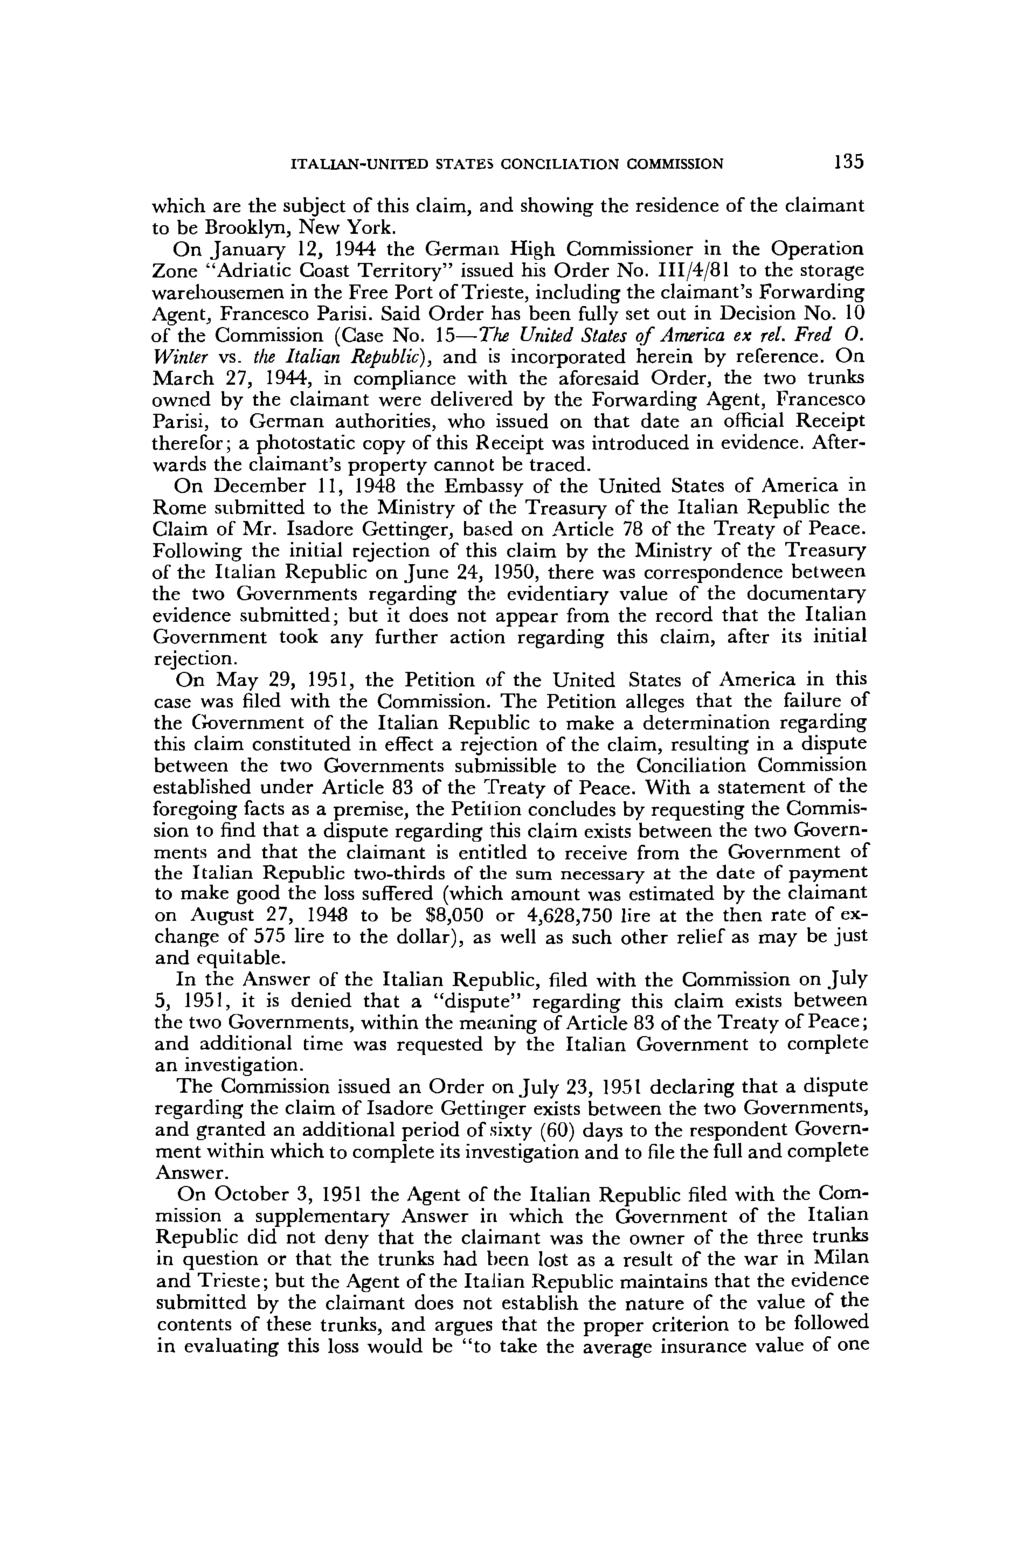 ITALIAN-UNITED STATES CONCILIATION COMMISSION 135 which are the subject of this claim, and showing the residence of the claimant to be Brooklyn, New York.